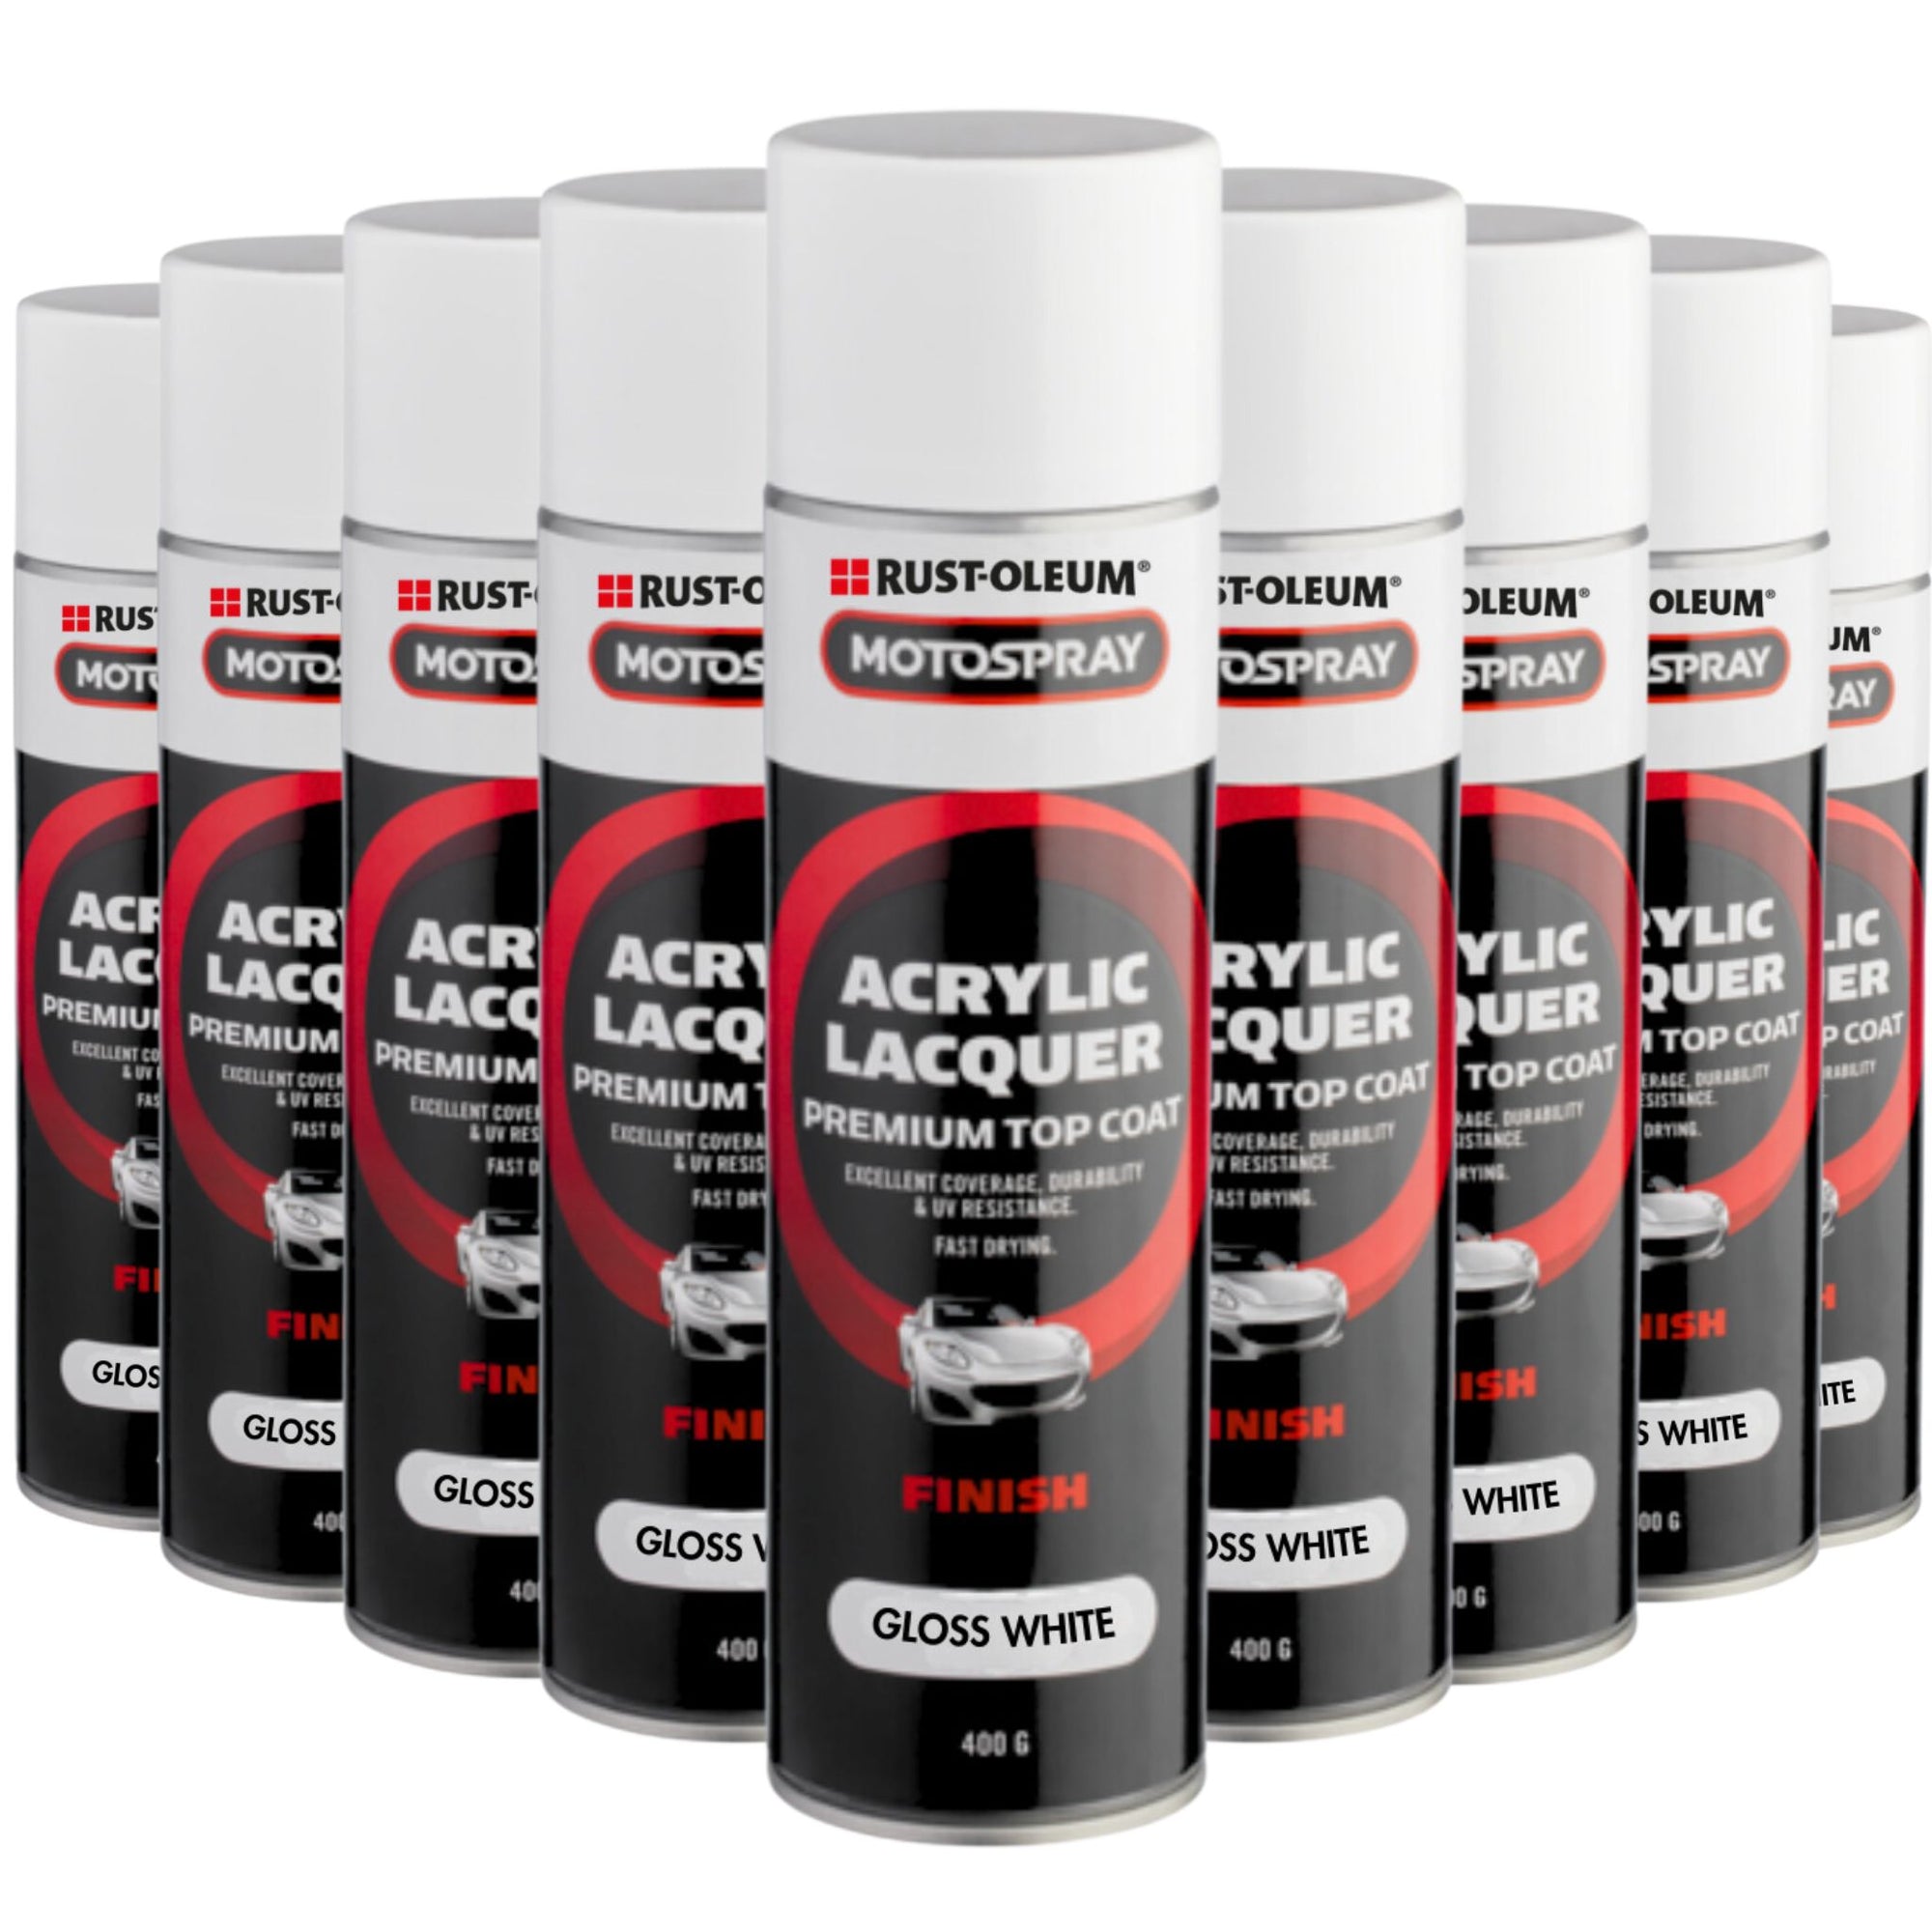 Rust-Oleum Motospray Premium Acrylic Lacquer Top Coat 400g | GLOSS WHITE (12 CANS) - South East Clearance Centre